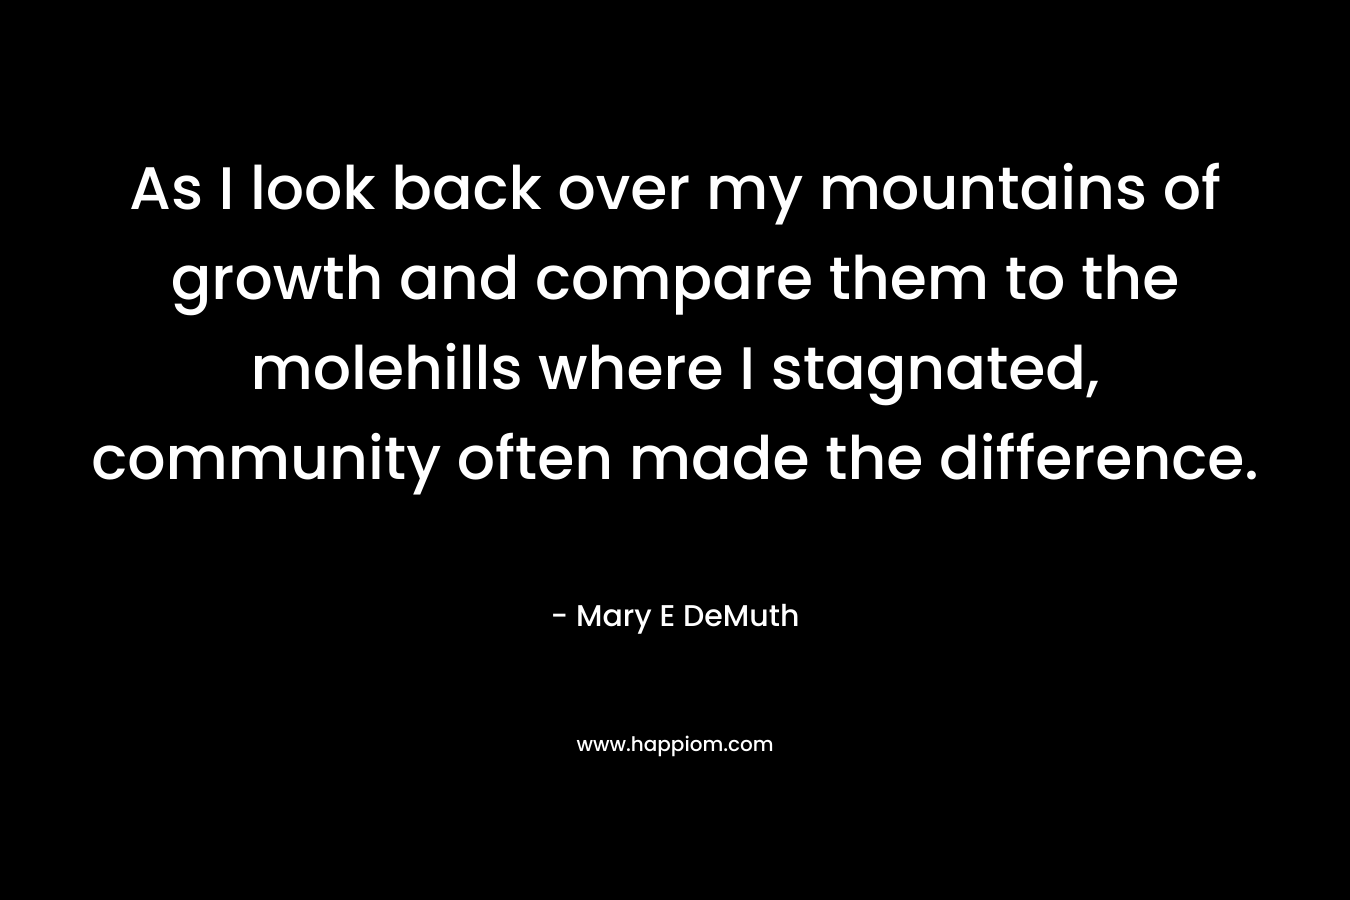 As I look back over my mountains of growth and compare them to the molehills where I stagnated, community often made the difference. – Mary E DeMuth